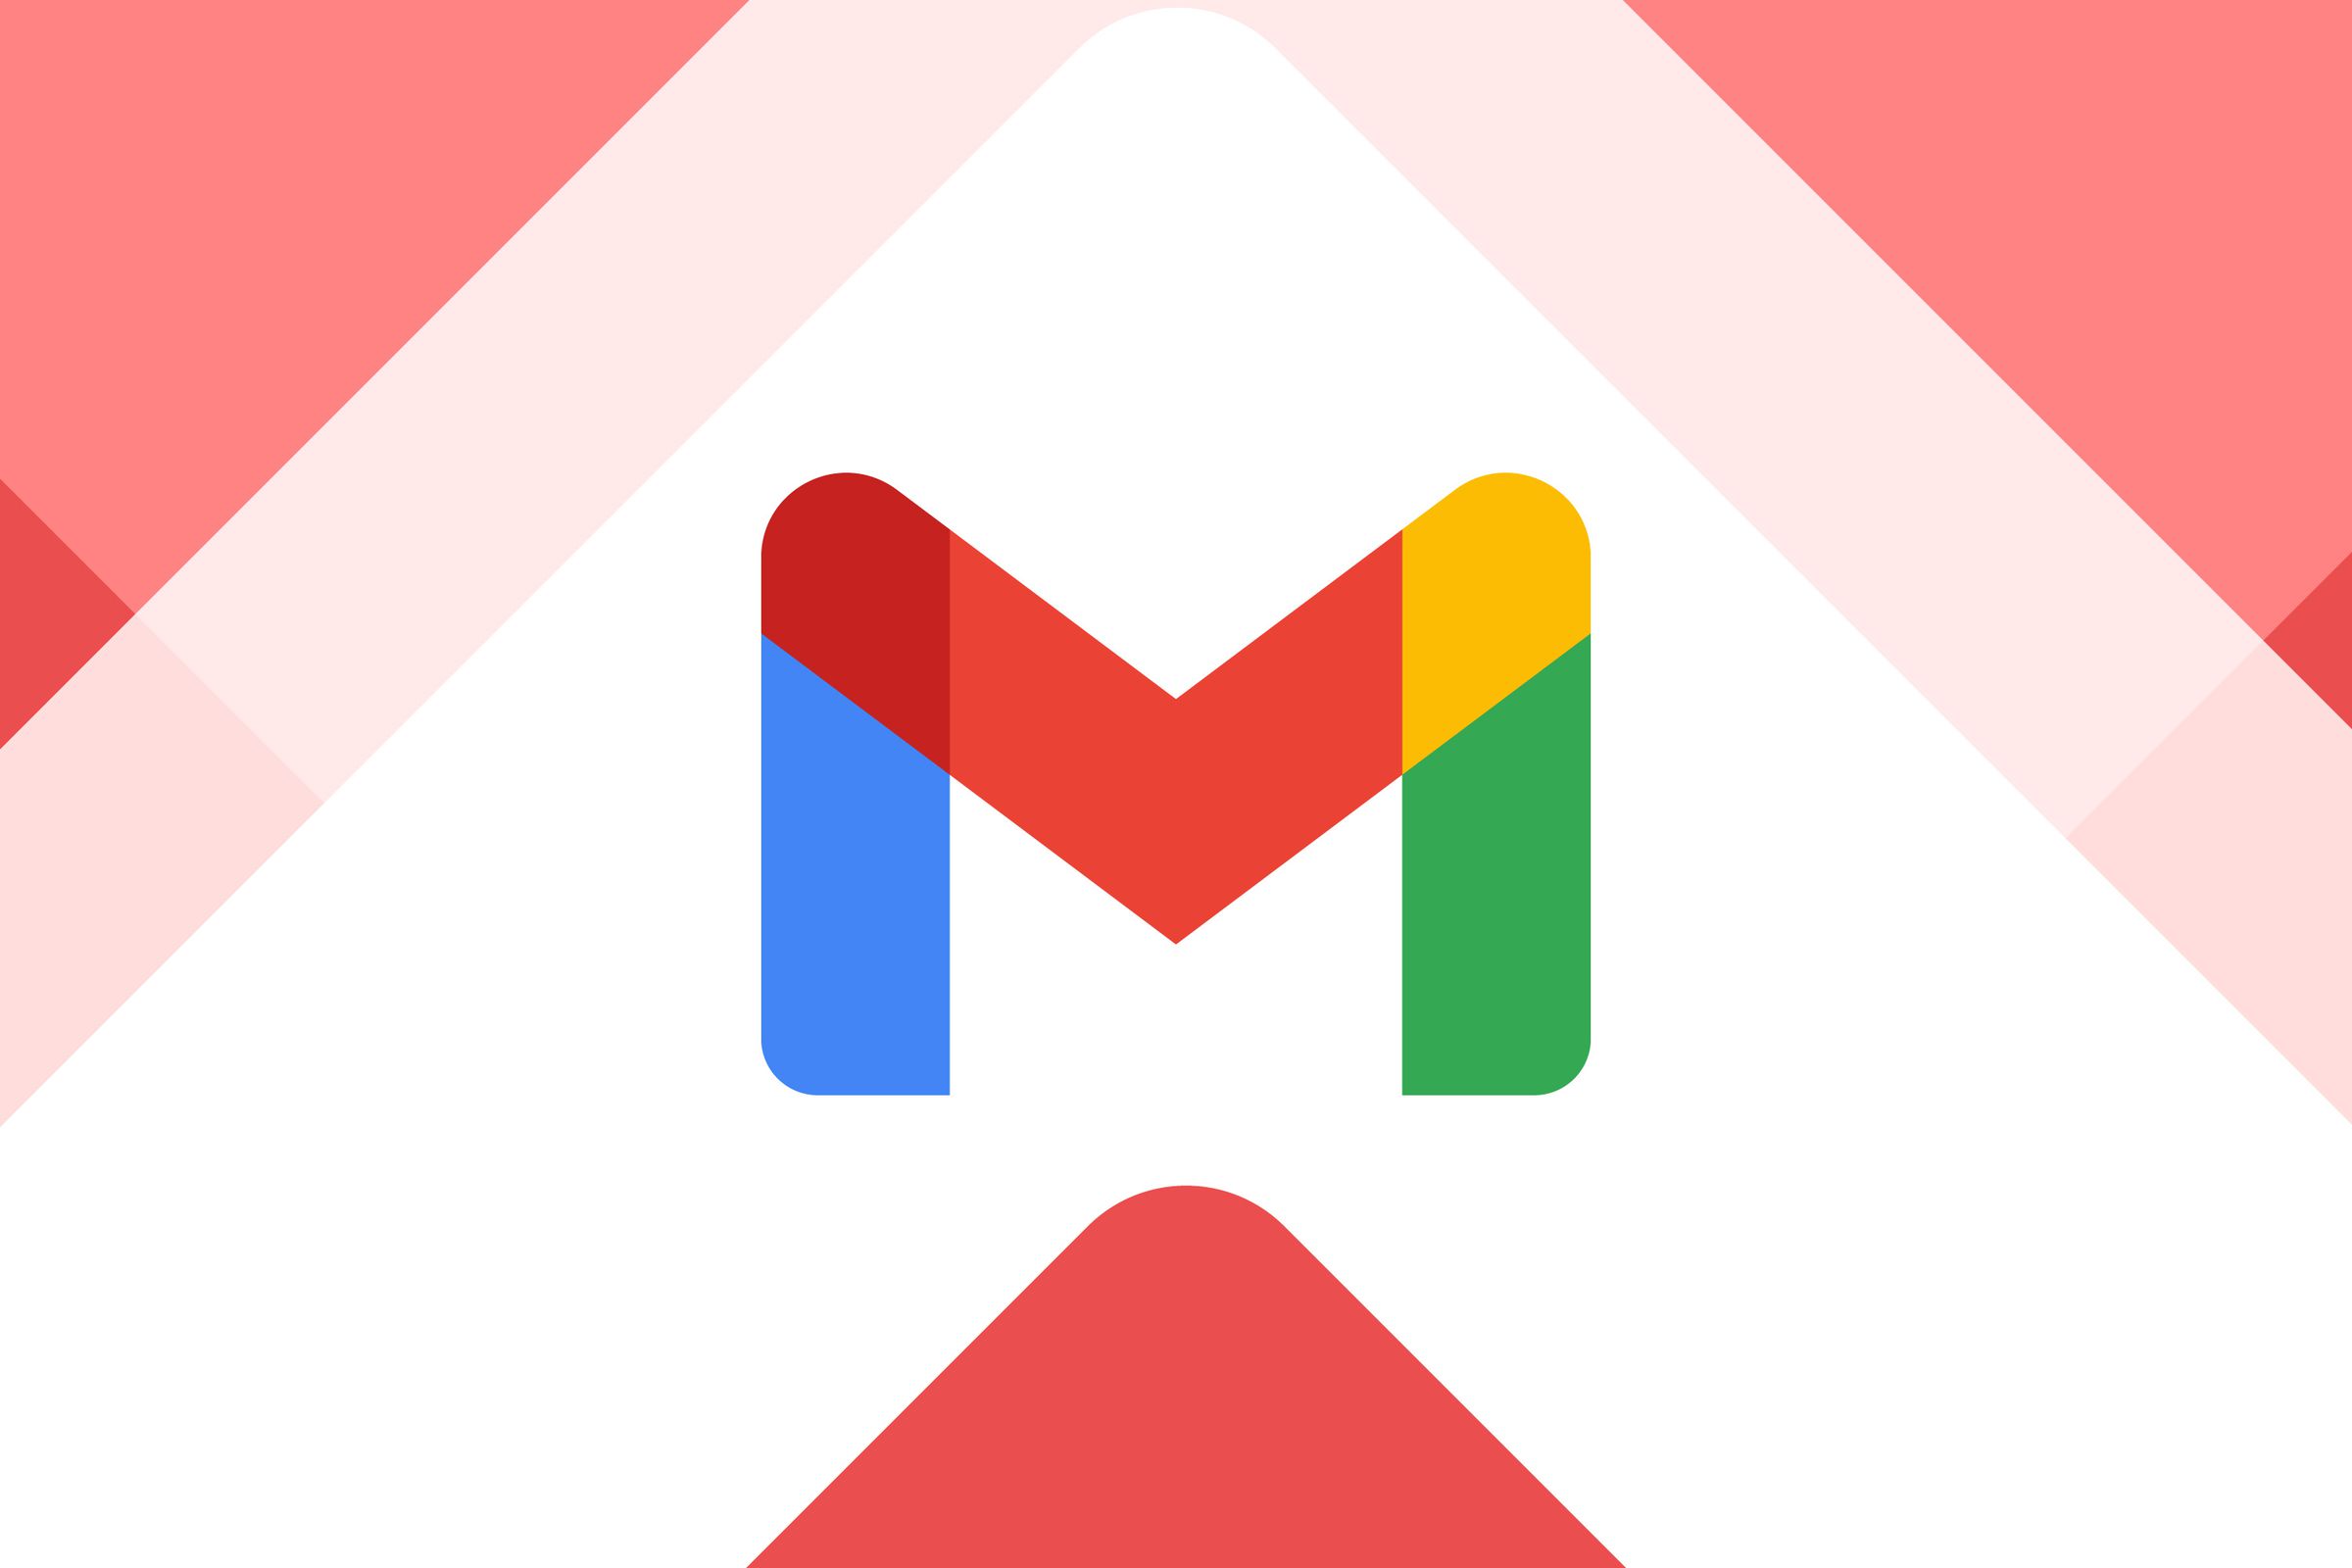 The Gmail logo on a red and white background